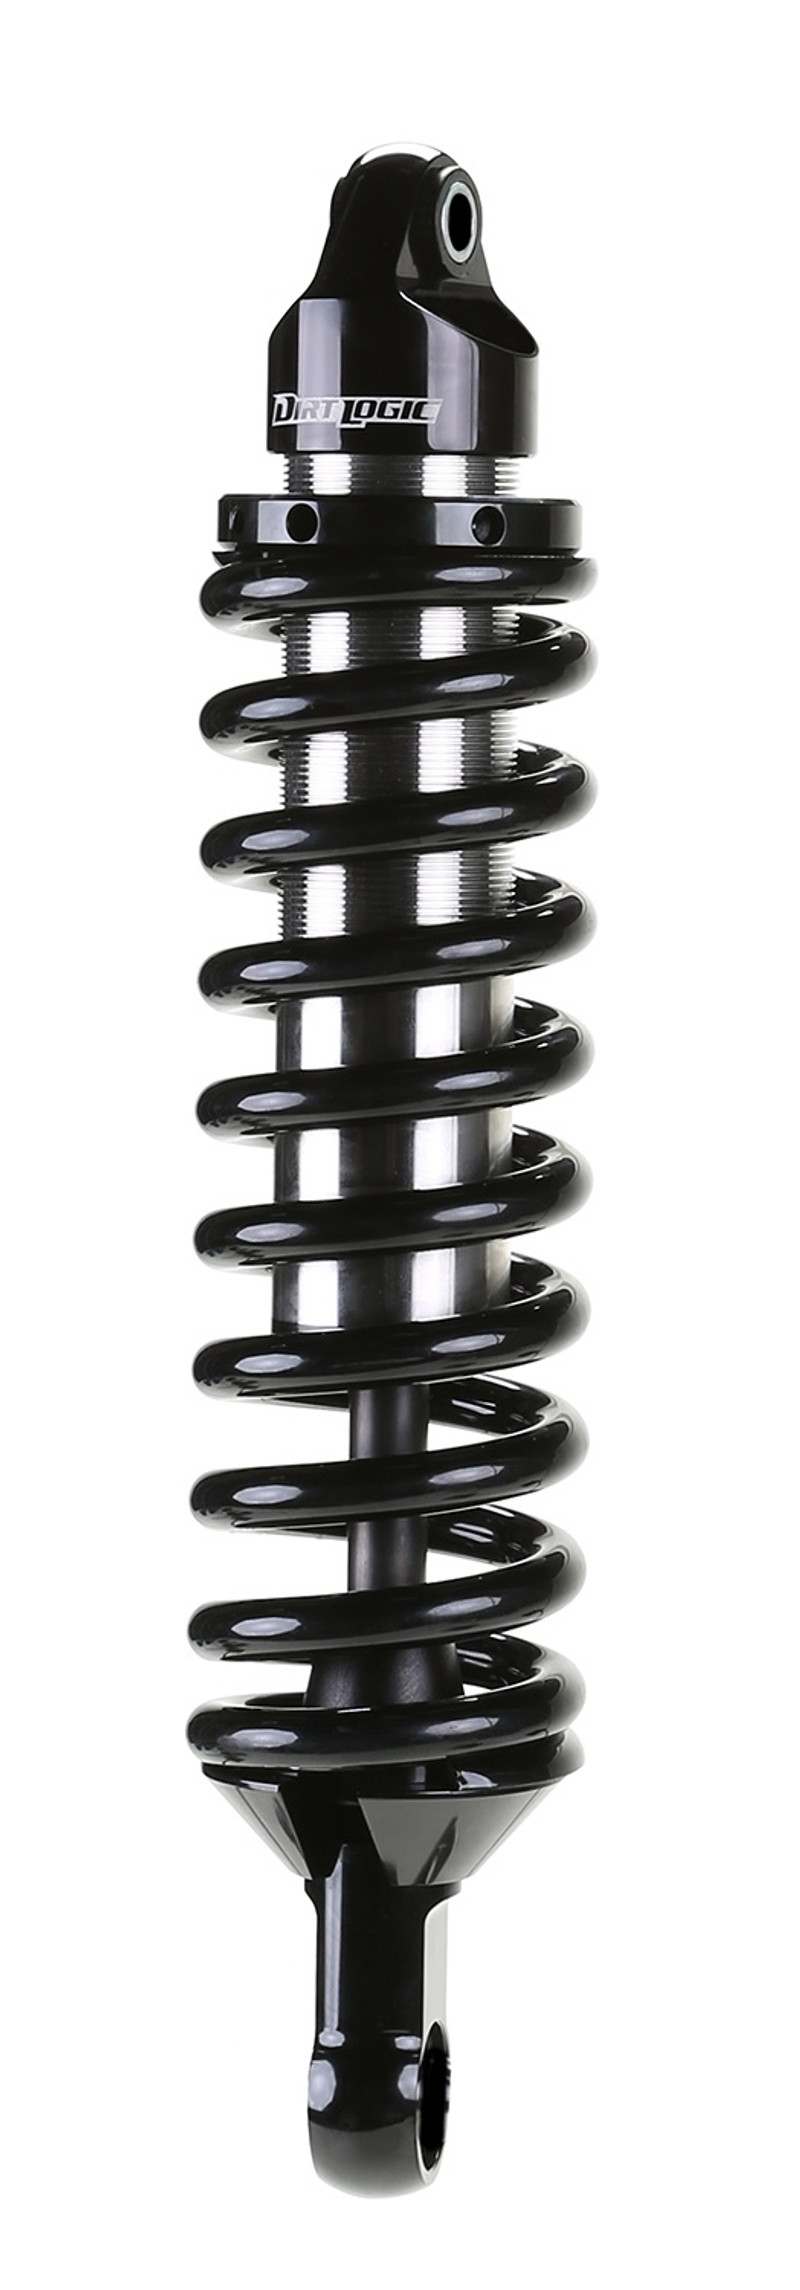 Fabtech Dirt Logic 2.5 Stainless Steel Coilover Shock Absorber, 6 in. Lift Front - FTS221842